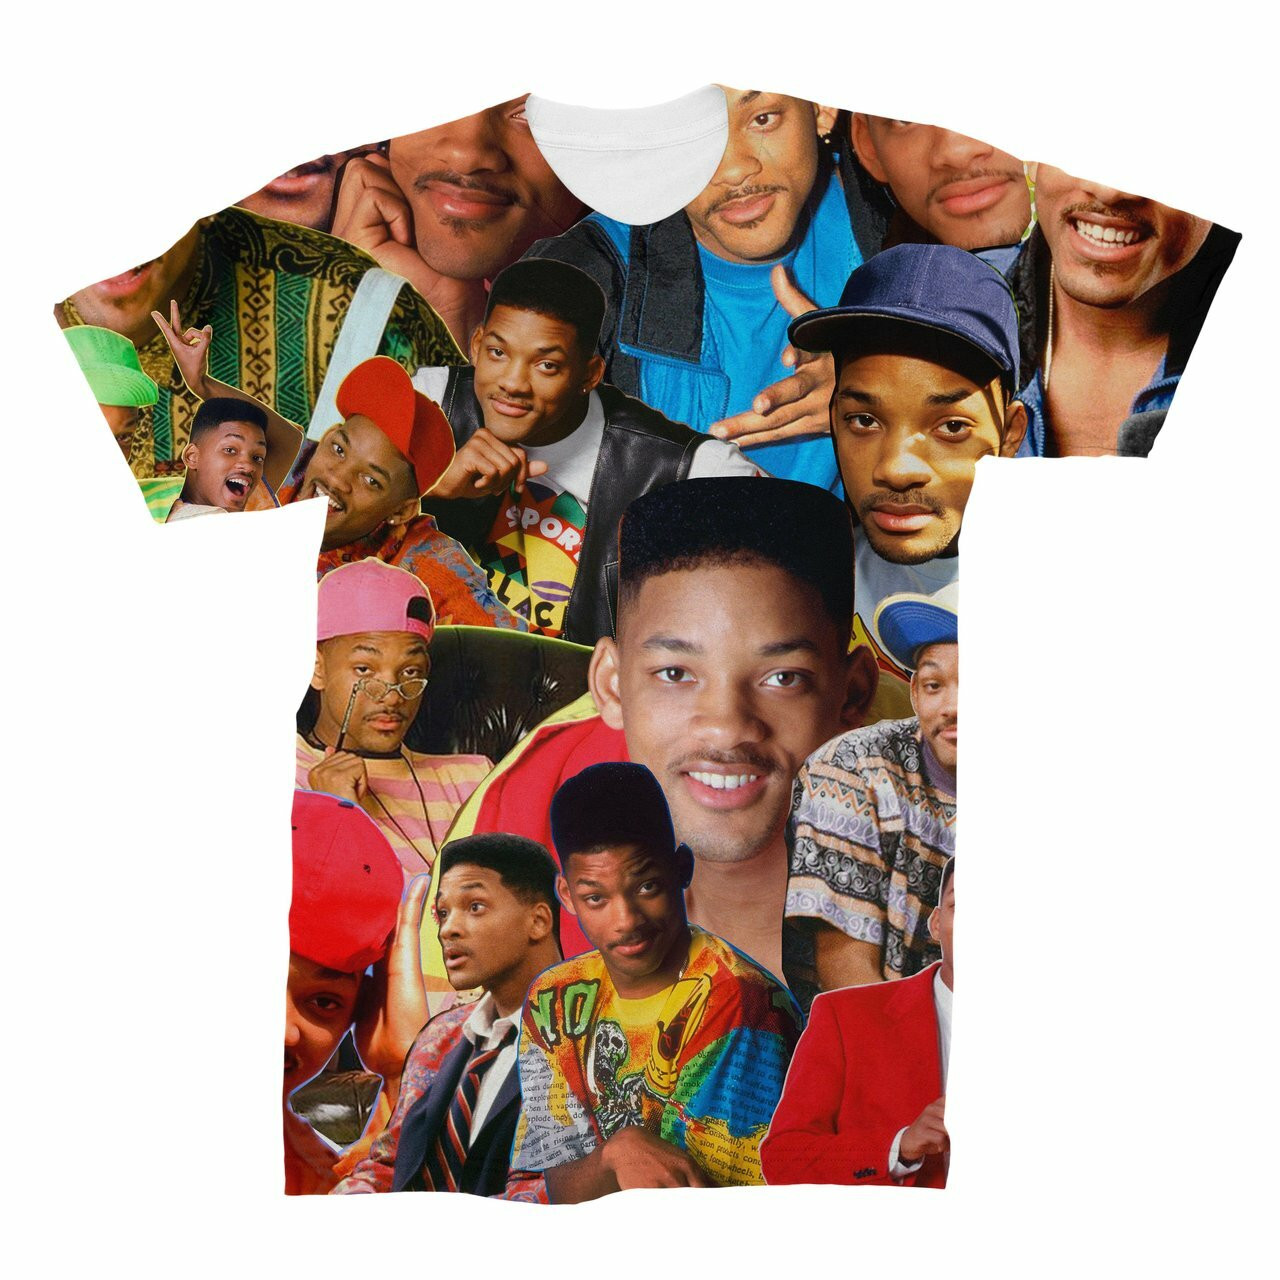 Will Smith (The Fresh Prince of Bel-Air) Photo Collage T-Shirt